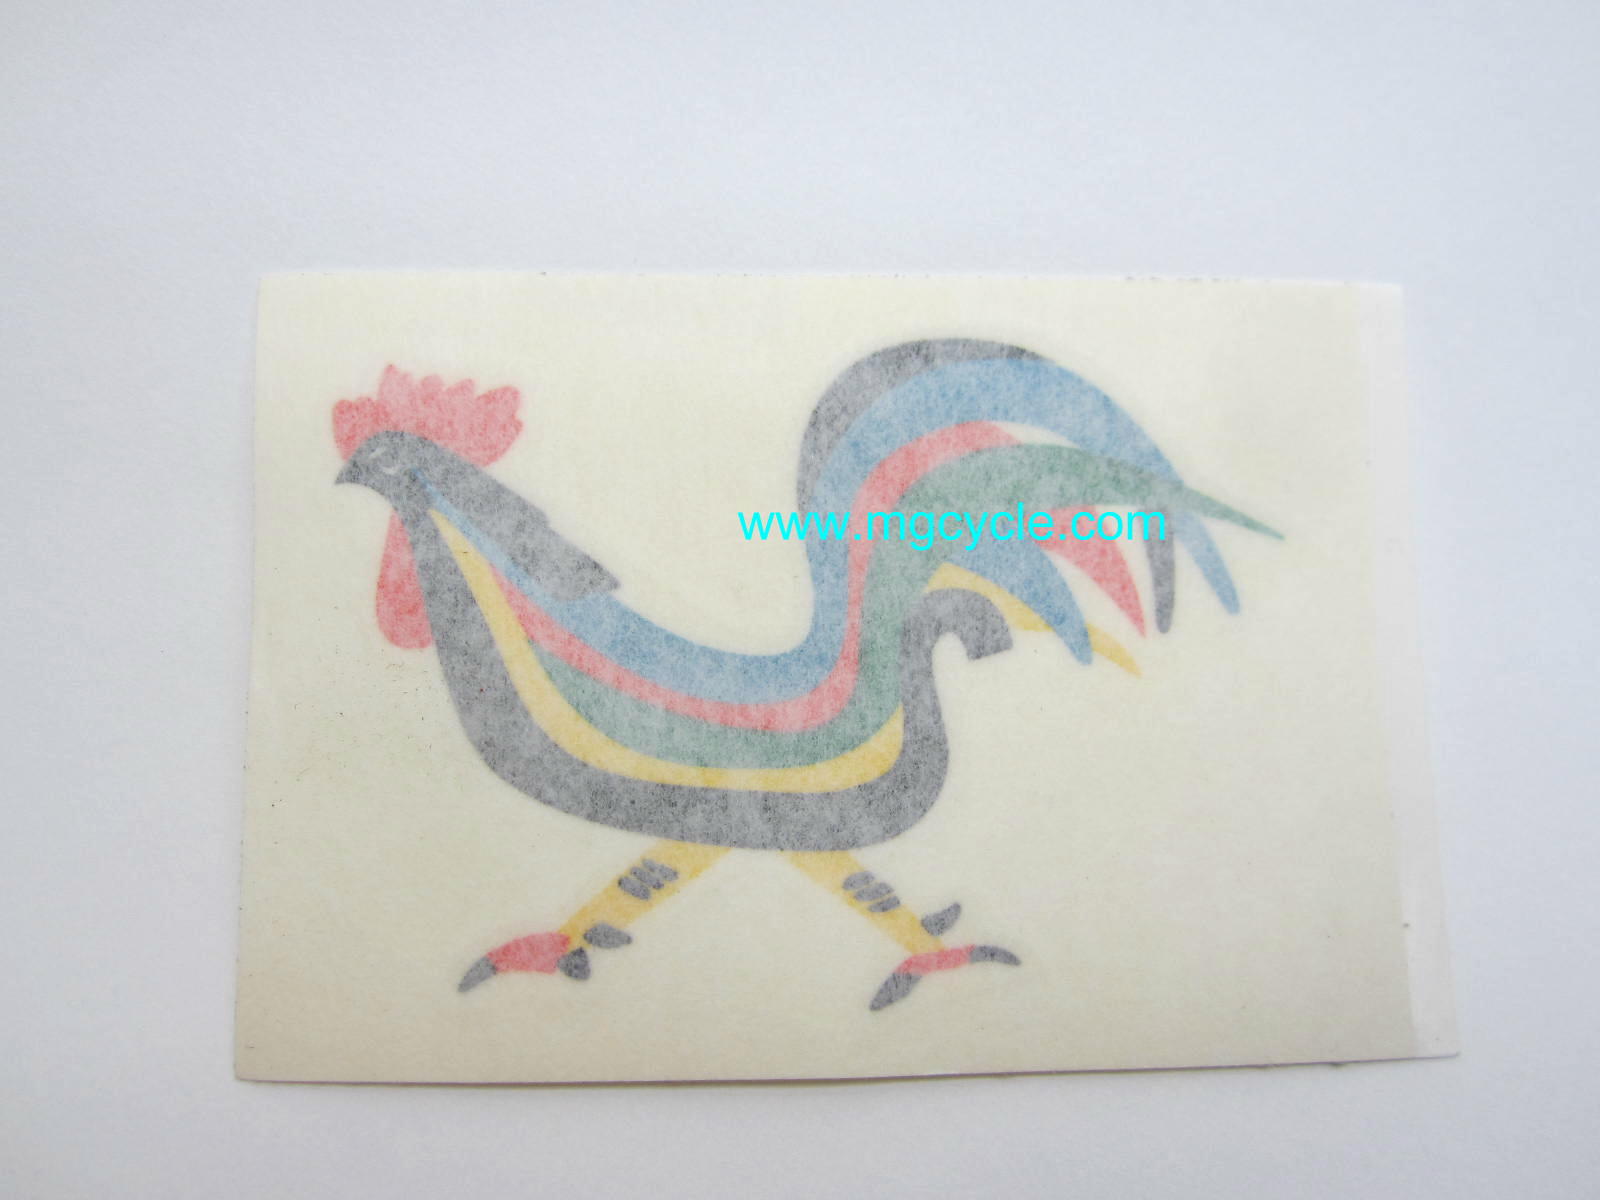 Galletto rooster decal, multi color transfer